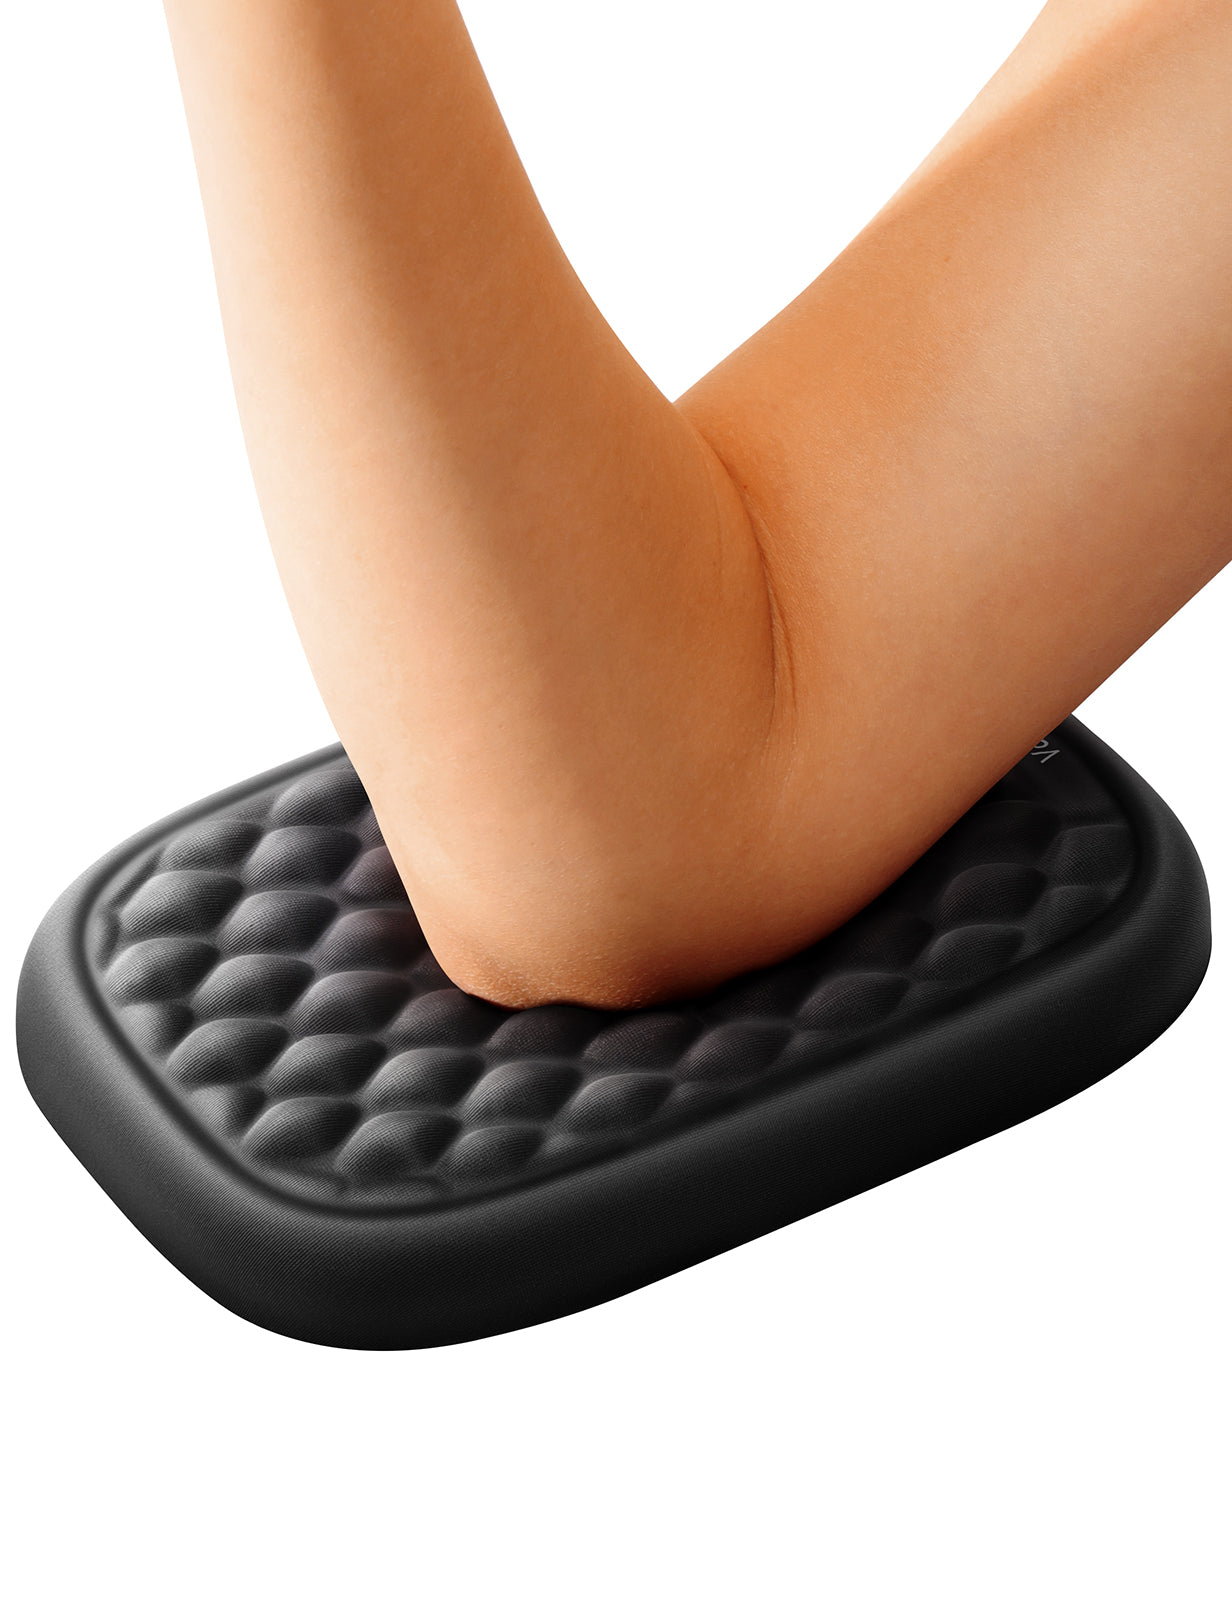 Vaydeer Elbow Rest Pad - 【Upgraded Larger and Thicker】